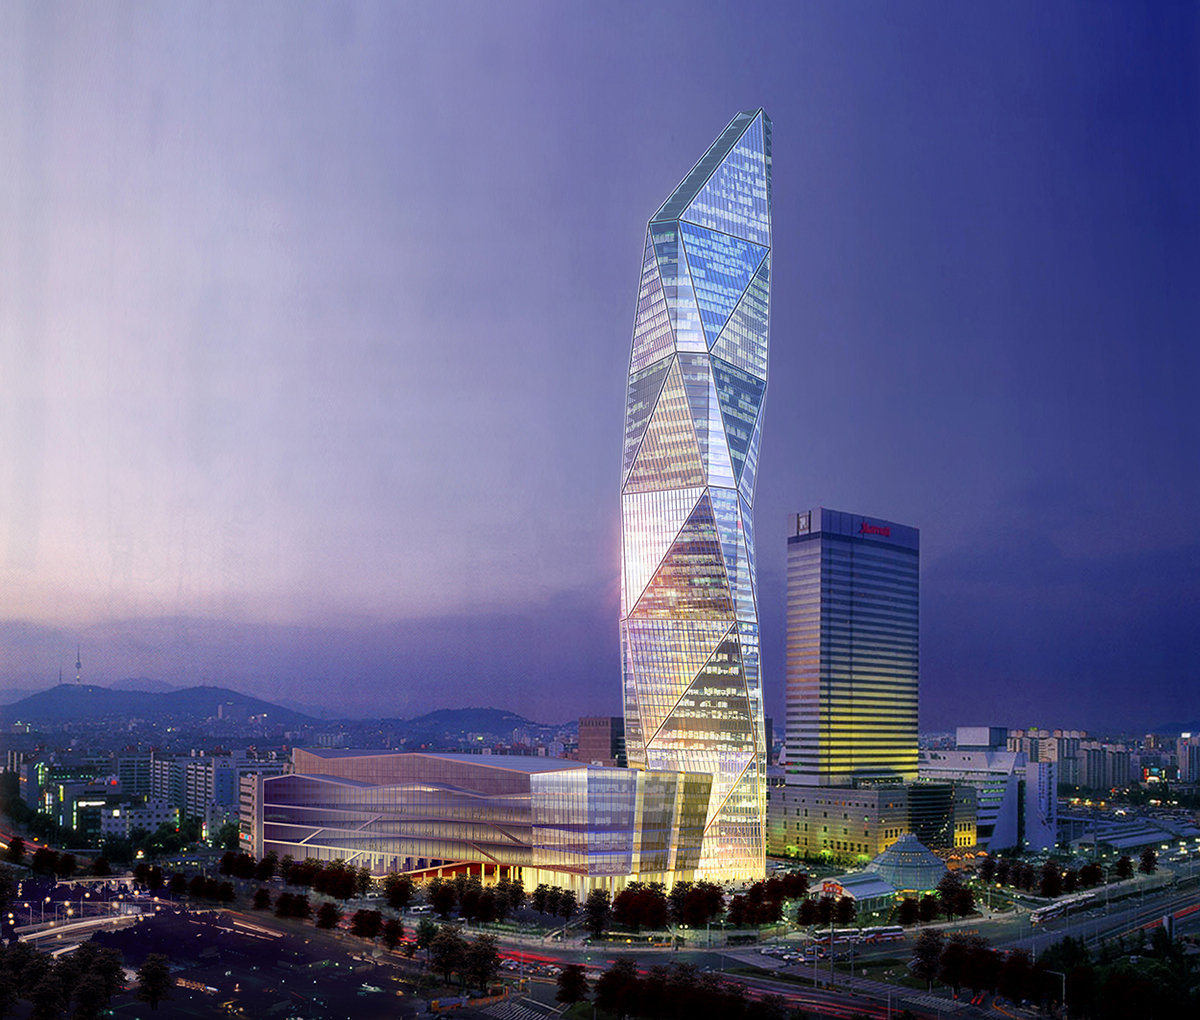 6 tskp central city company central city phase ii exterior rendering night time lighting and traffic 1400 xxx q85